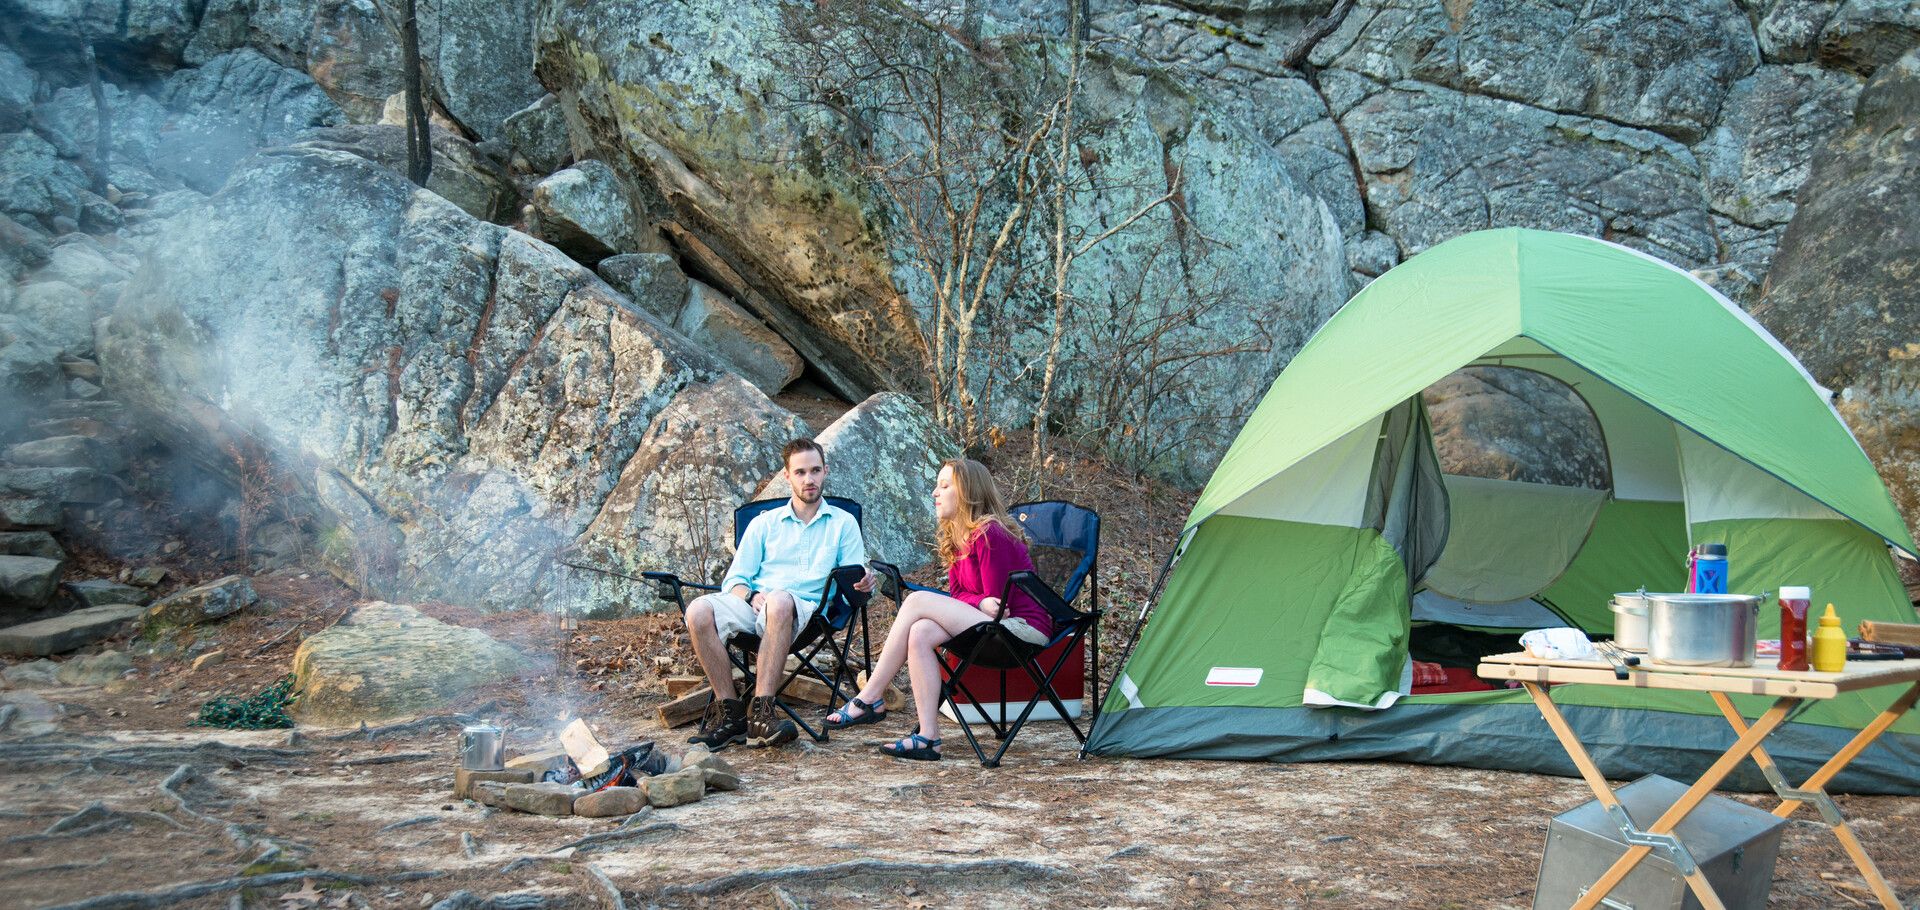 Camping & Campgrounds   - Oklahoma's Official Travel & Tourism  Site